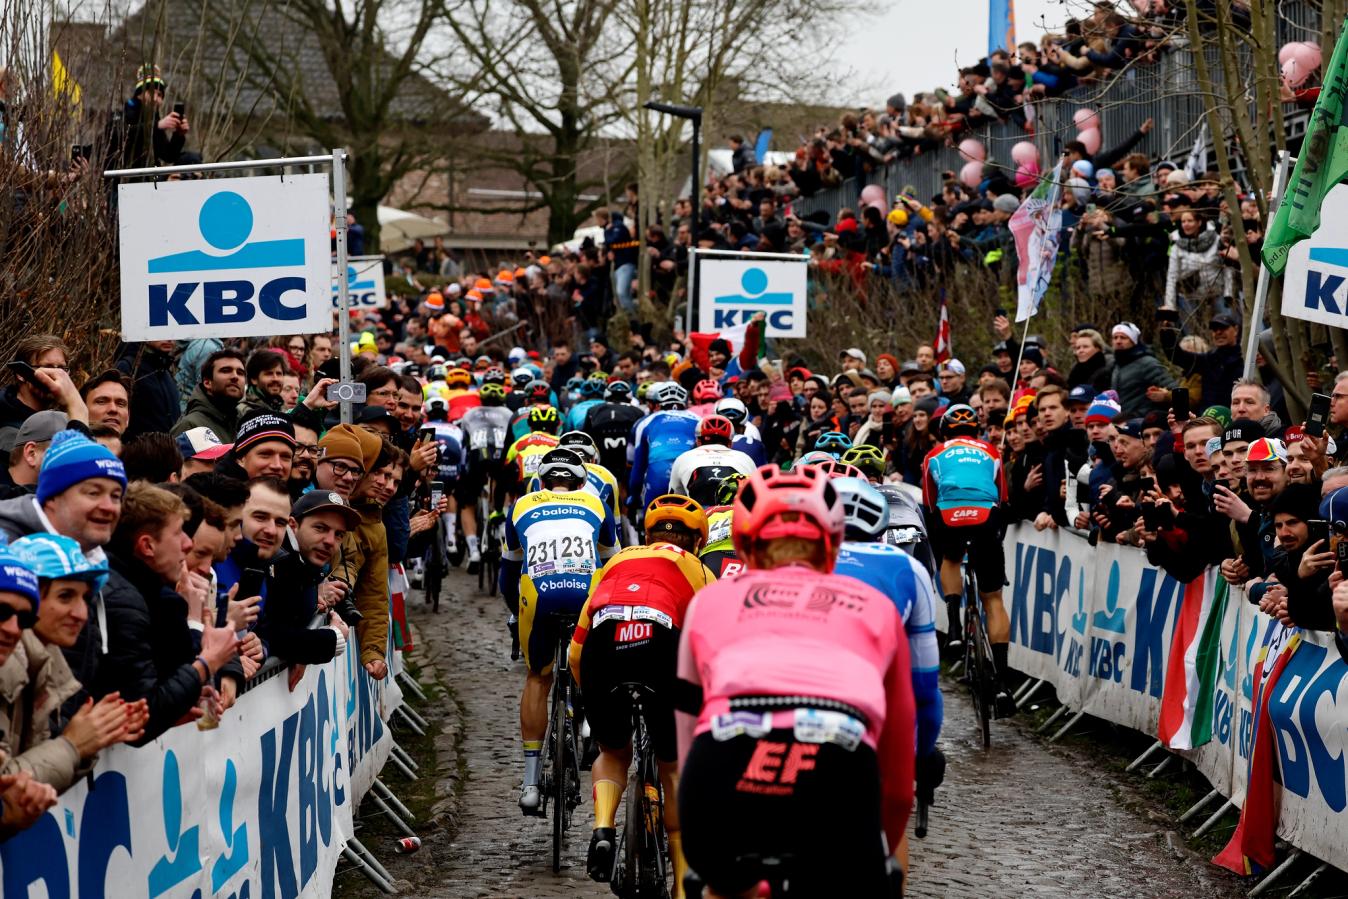 The Tour of Flanders always brings the crowds out